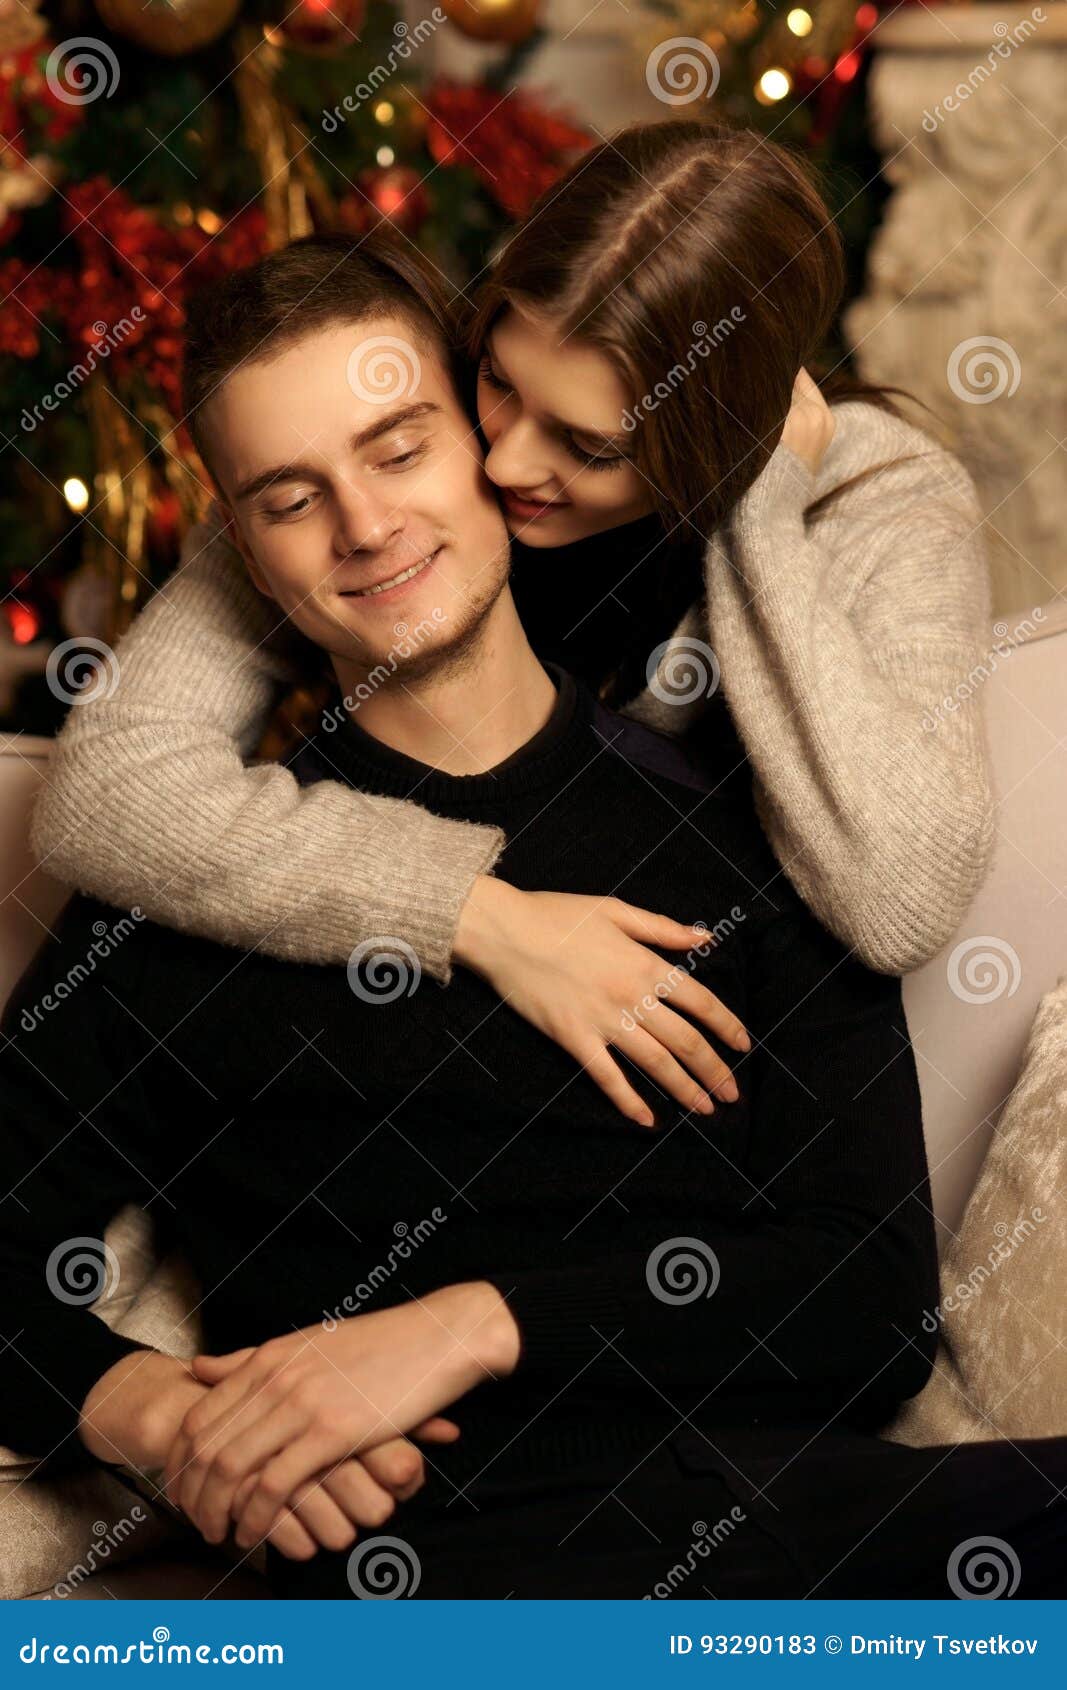 Romantic Couple Hugging in Christmas Interior Stock Image - Image ...